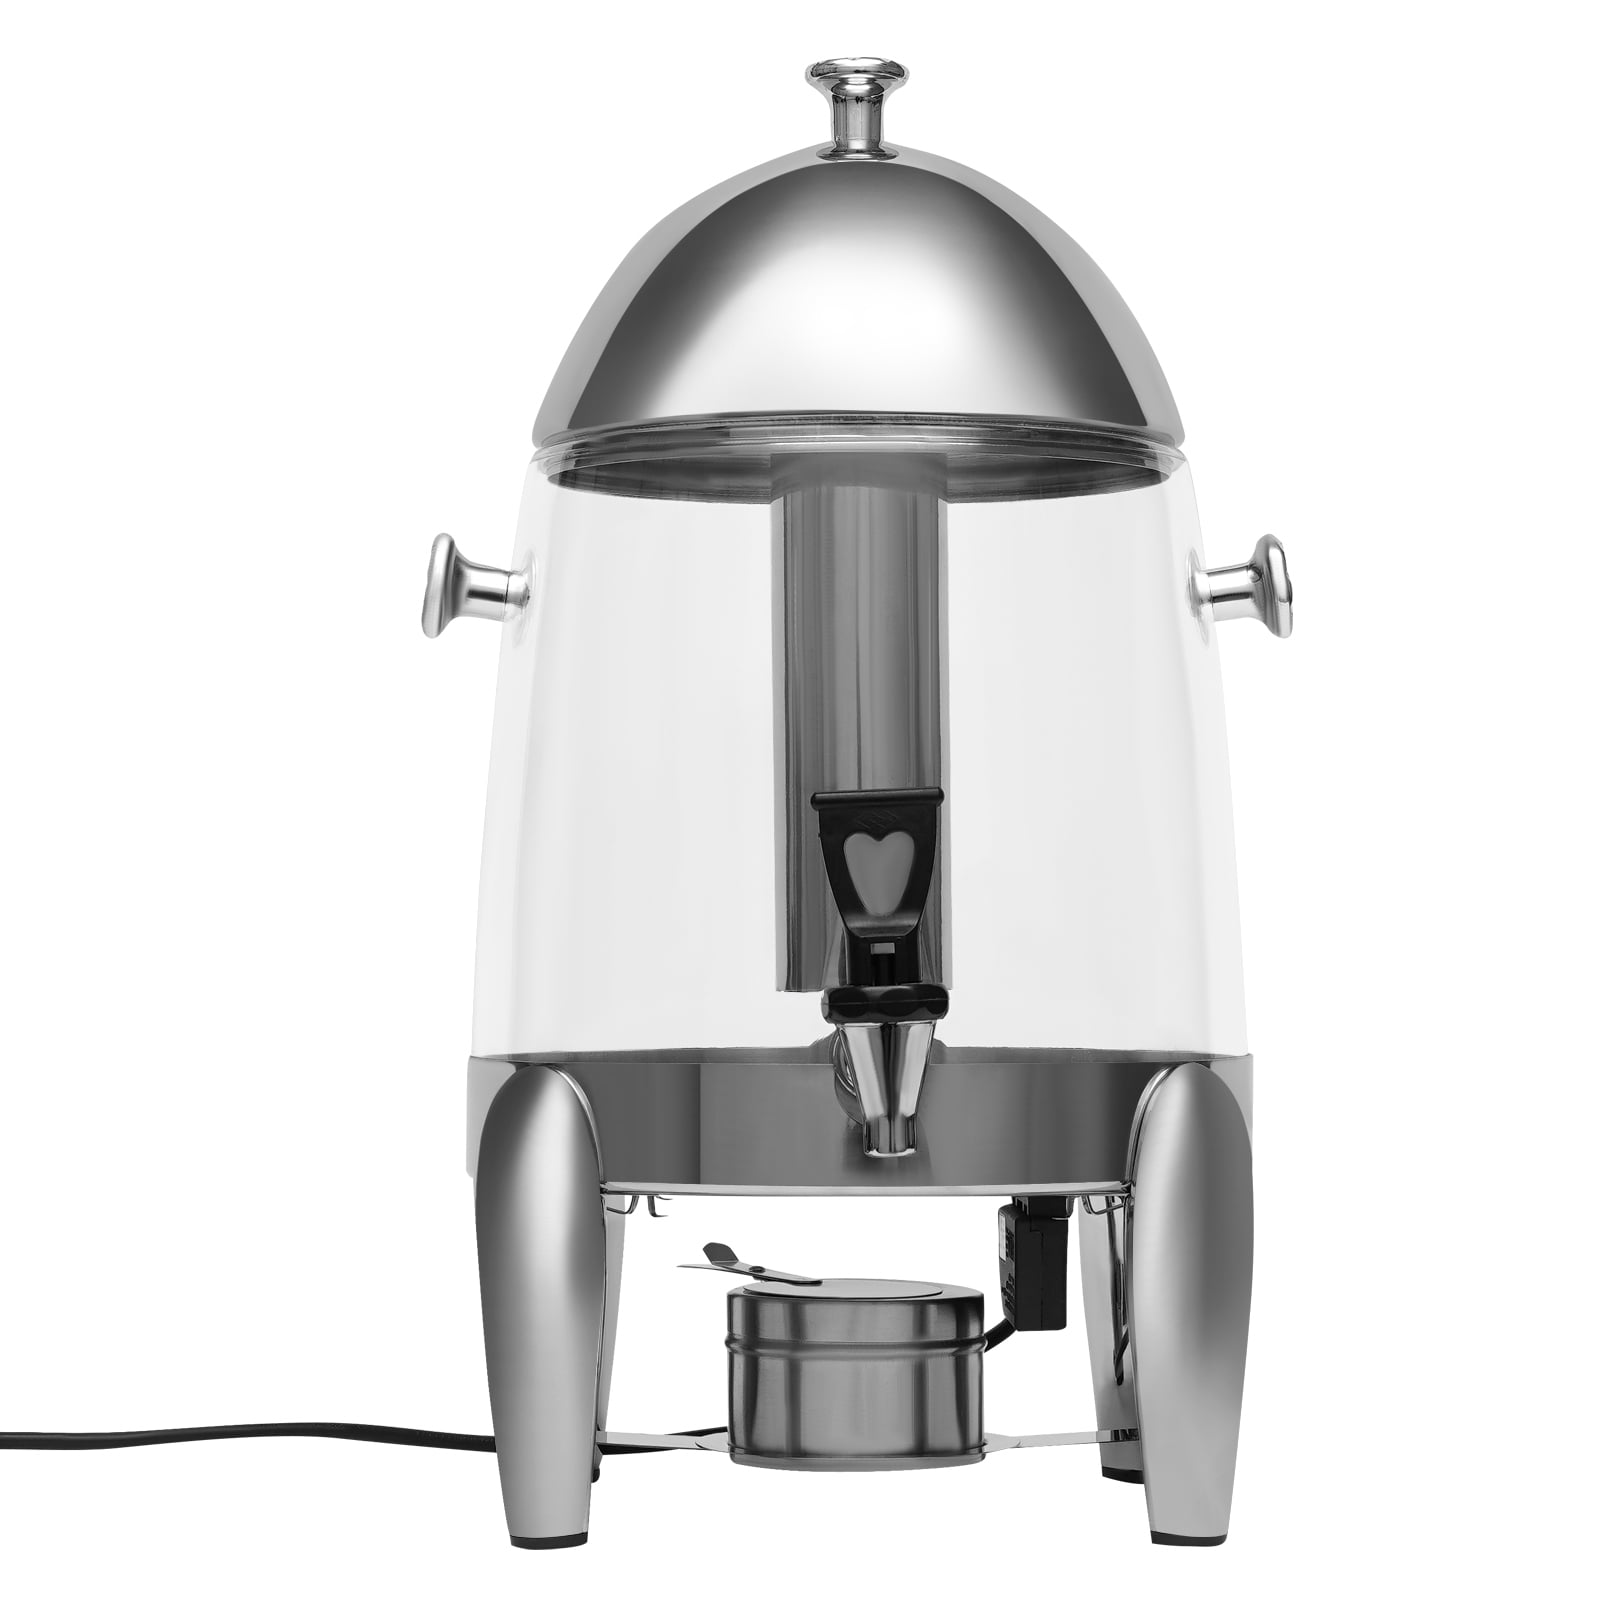 13X11X22 inches 13 Liters 3.5 Gallon Hot Beverage Tea Coffee Dispenser  Chafer, Coffee Urn, Large Stainless Steel Warm Apple Cider Drink Dispenser  with Mini Burner Stove Container 13037-NEW 